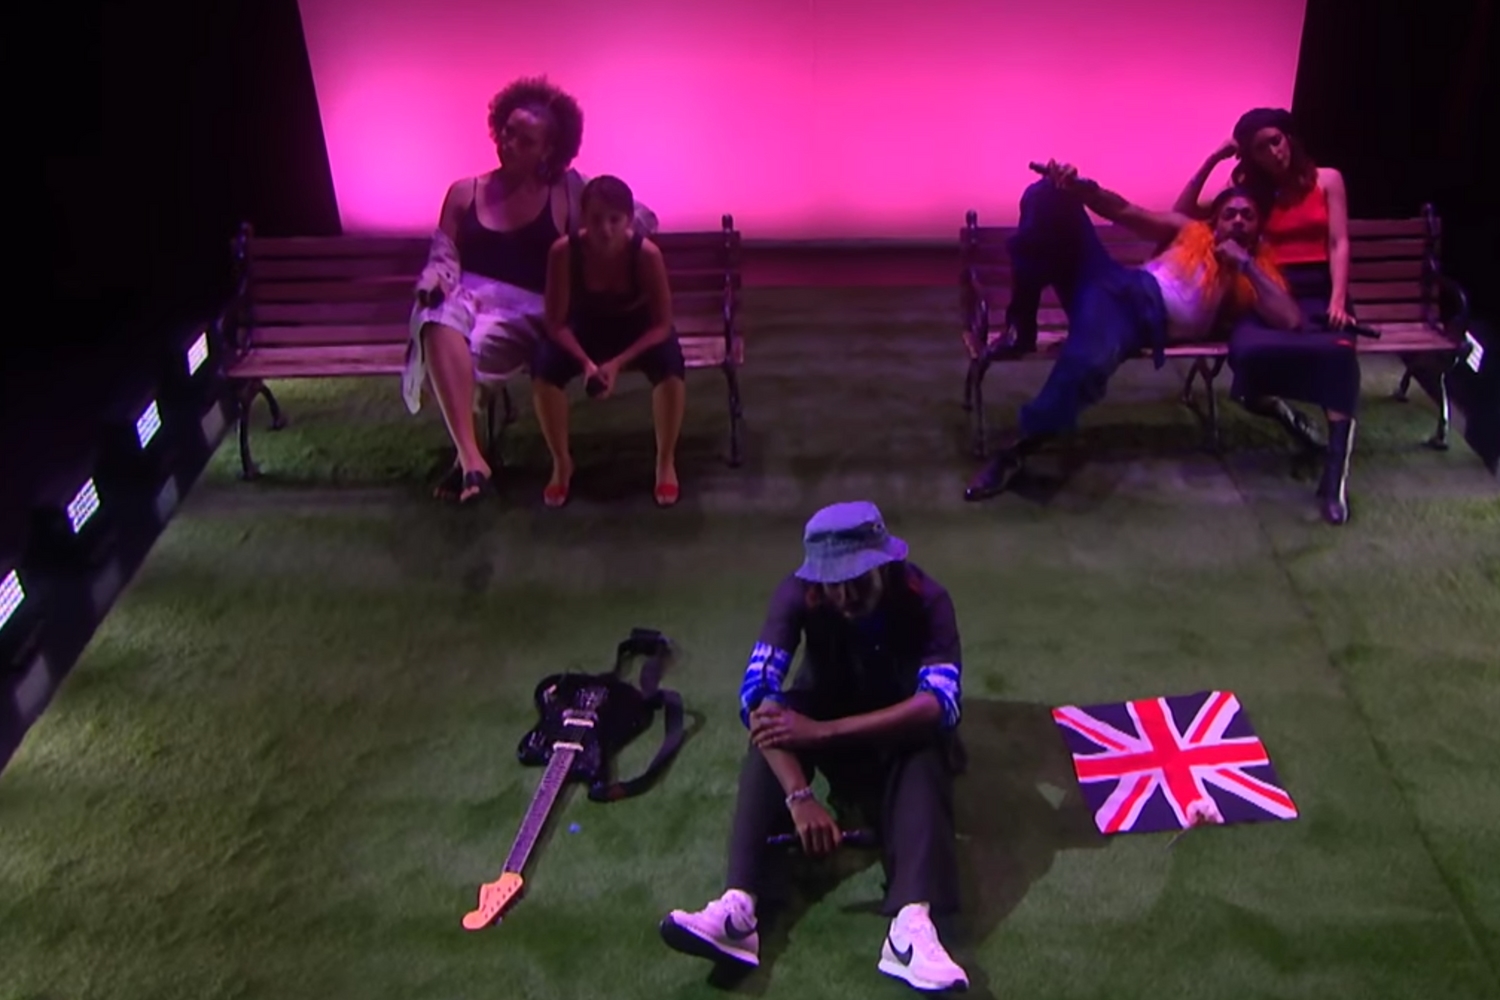 Blood Orange plays new songs ‘Something To Do’ and ‘Dark Handsome’ on telly